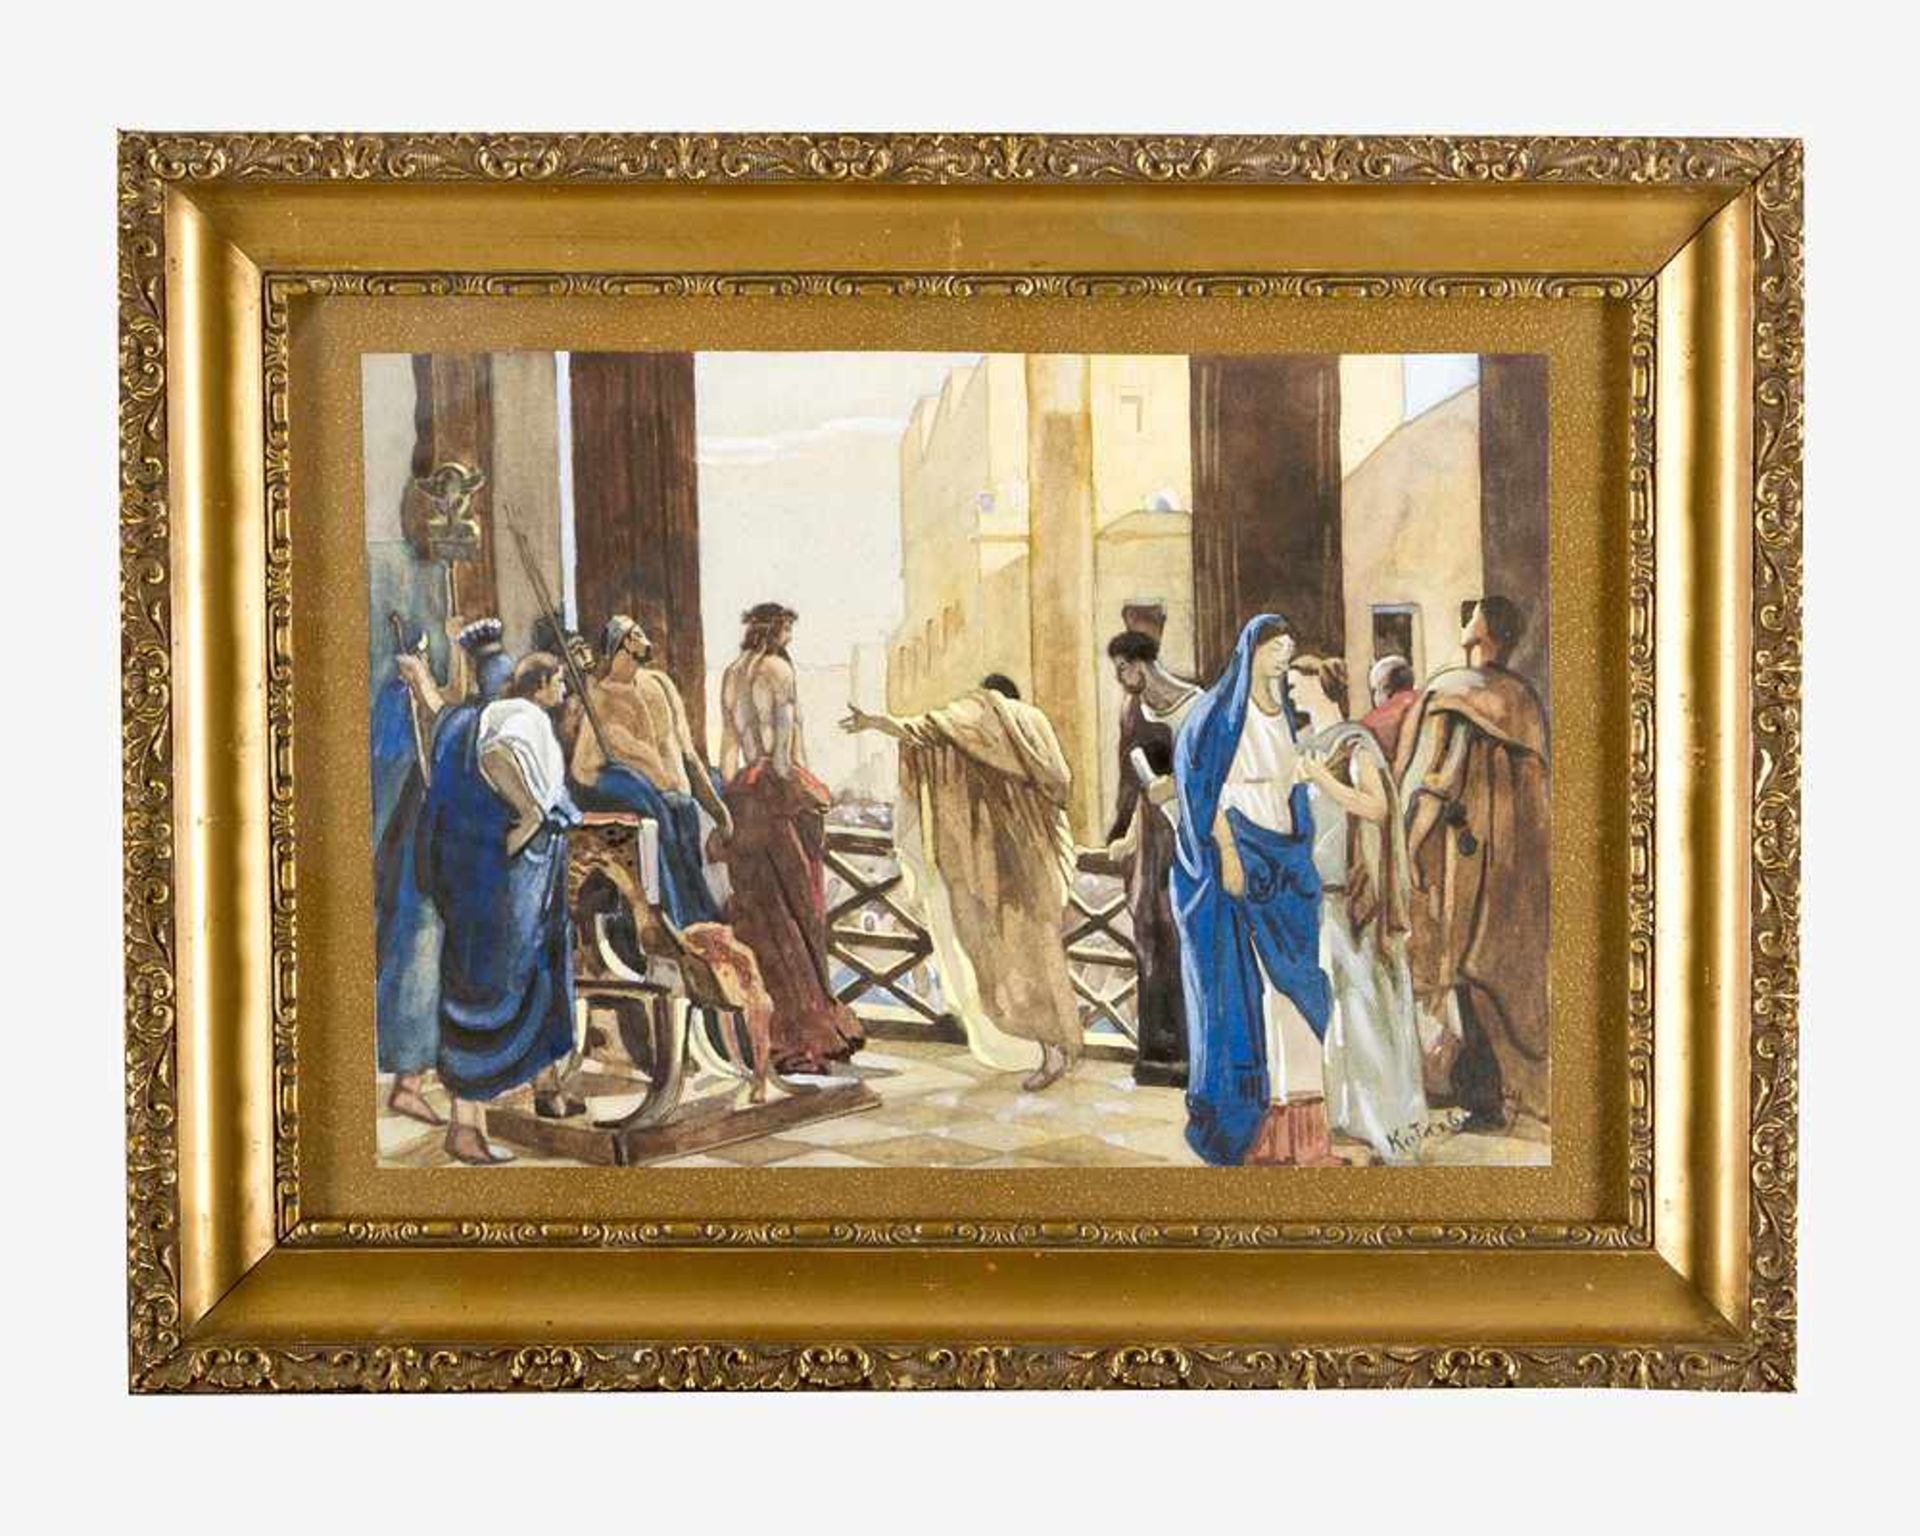 Unknown Artist 20 Century. Jesus accused. Watercolour on paper, signed bottom right KOTARB … ? ,